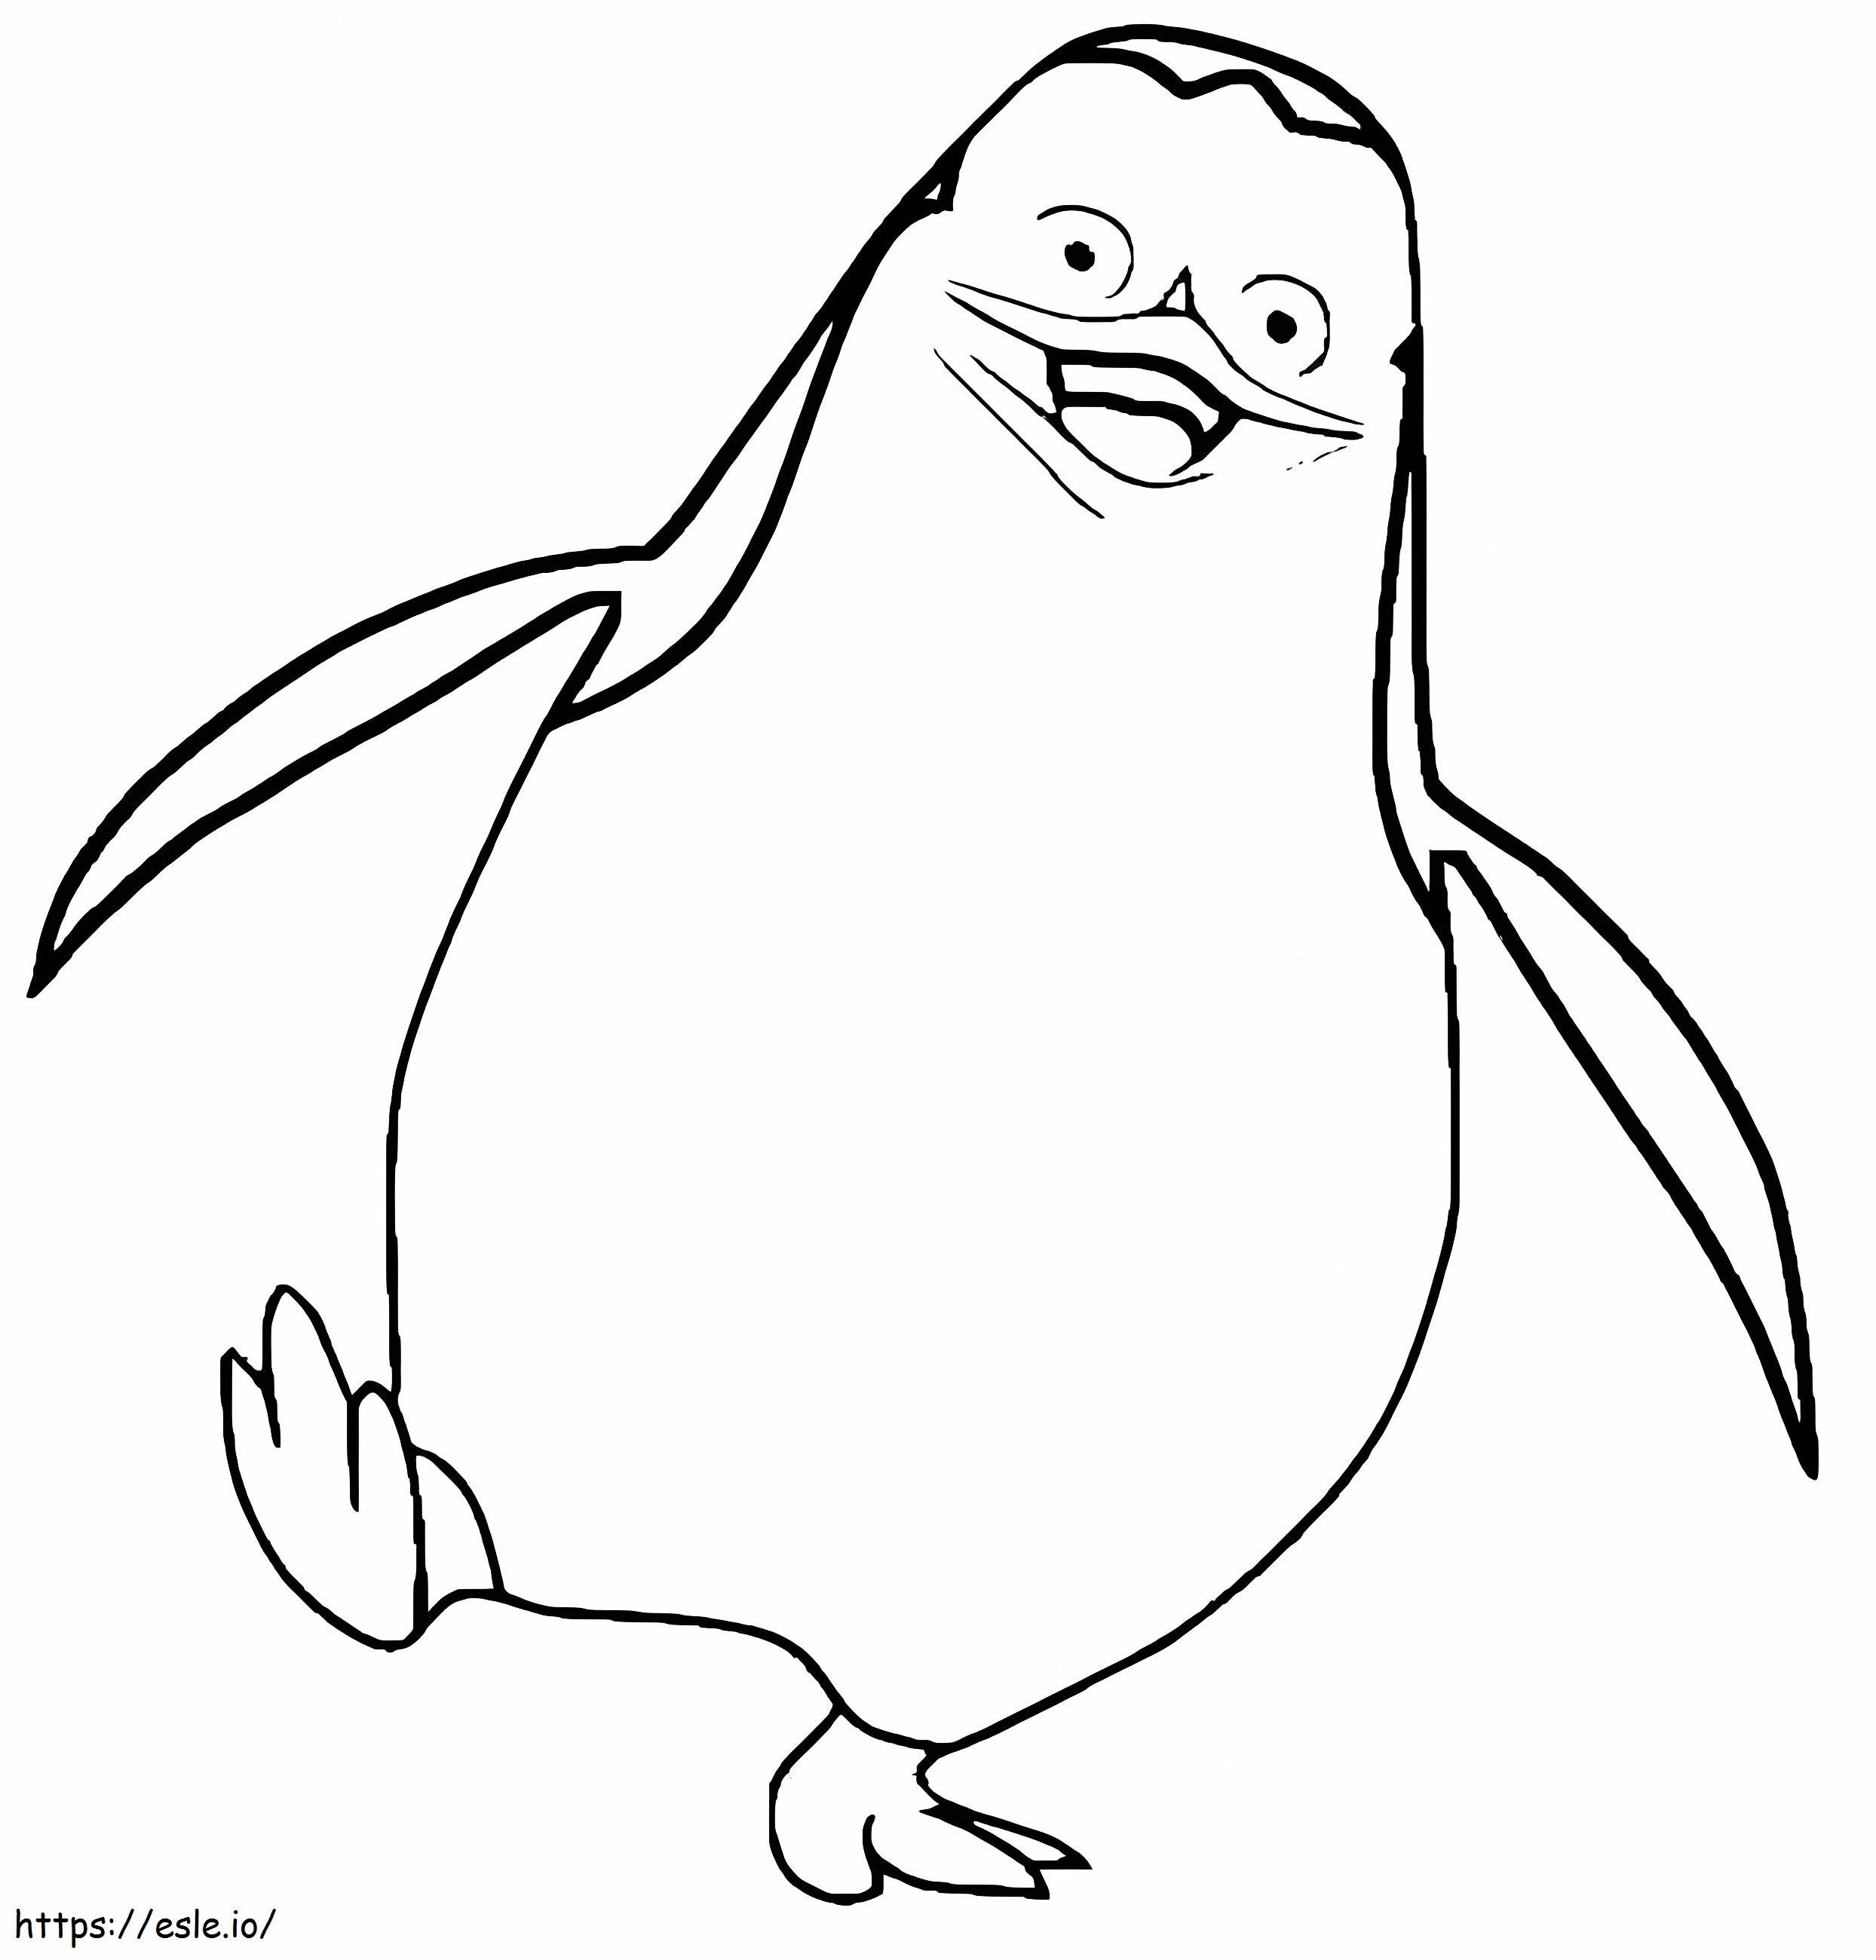 Private In Penguins Of Madagascar coloring page